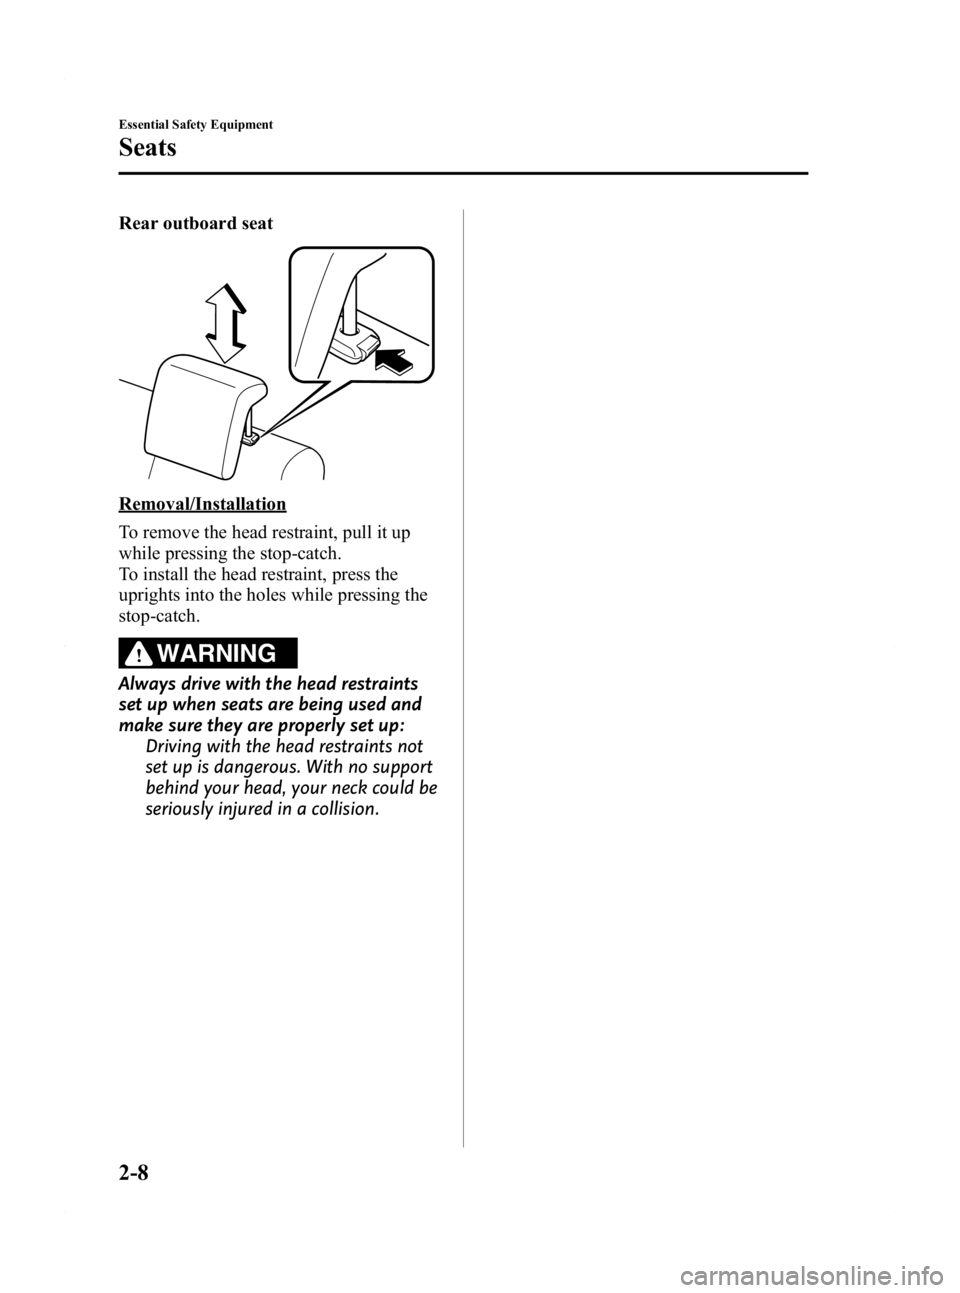 MAZDA MODEL 2 2011 User Guide Black plate (20,1)
Rear outboard seat
Removal/Installation
To remove the head restraint, pull it up
while pressing the stop-catch.
To install the head restraint, press the
uprights into the holes whil